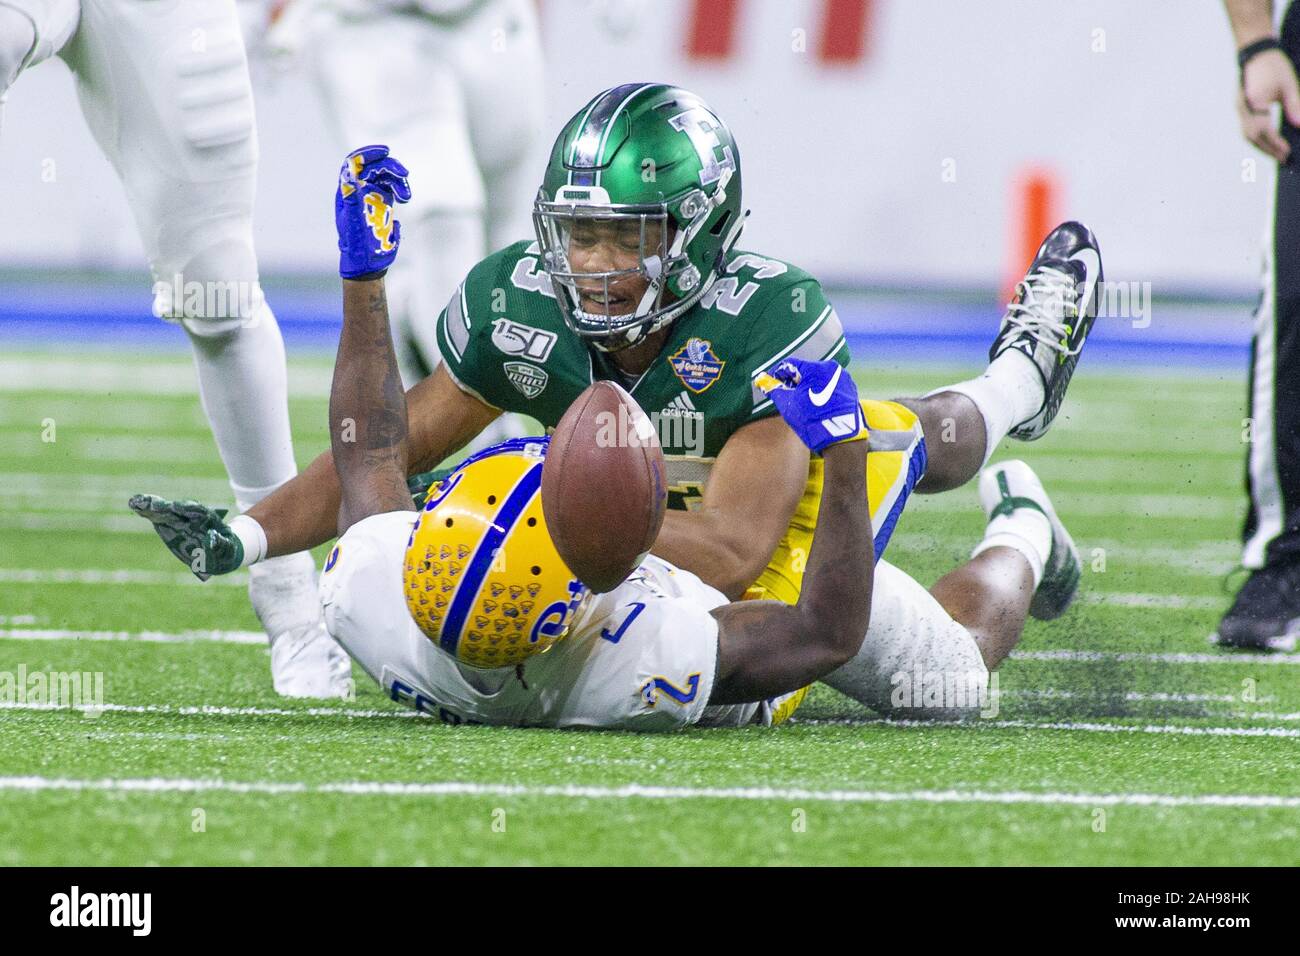 Detroit, Michigan, USA. 27th Dec, 2019. Eastern Michigan defensive back  BLAKE BOGAN (23) breaks up a pass intended for Pittsburgh wide receiver  JARED WAYNE (82) during Pittsburgh's 34-30 victory over Eastern Michigan